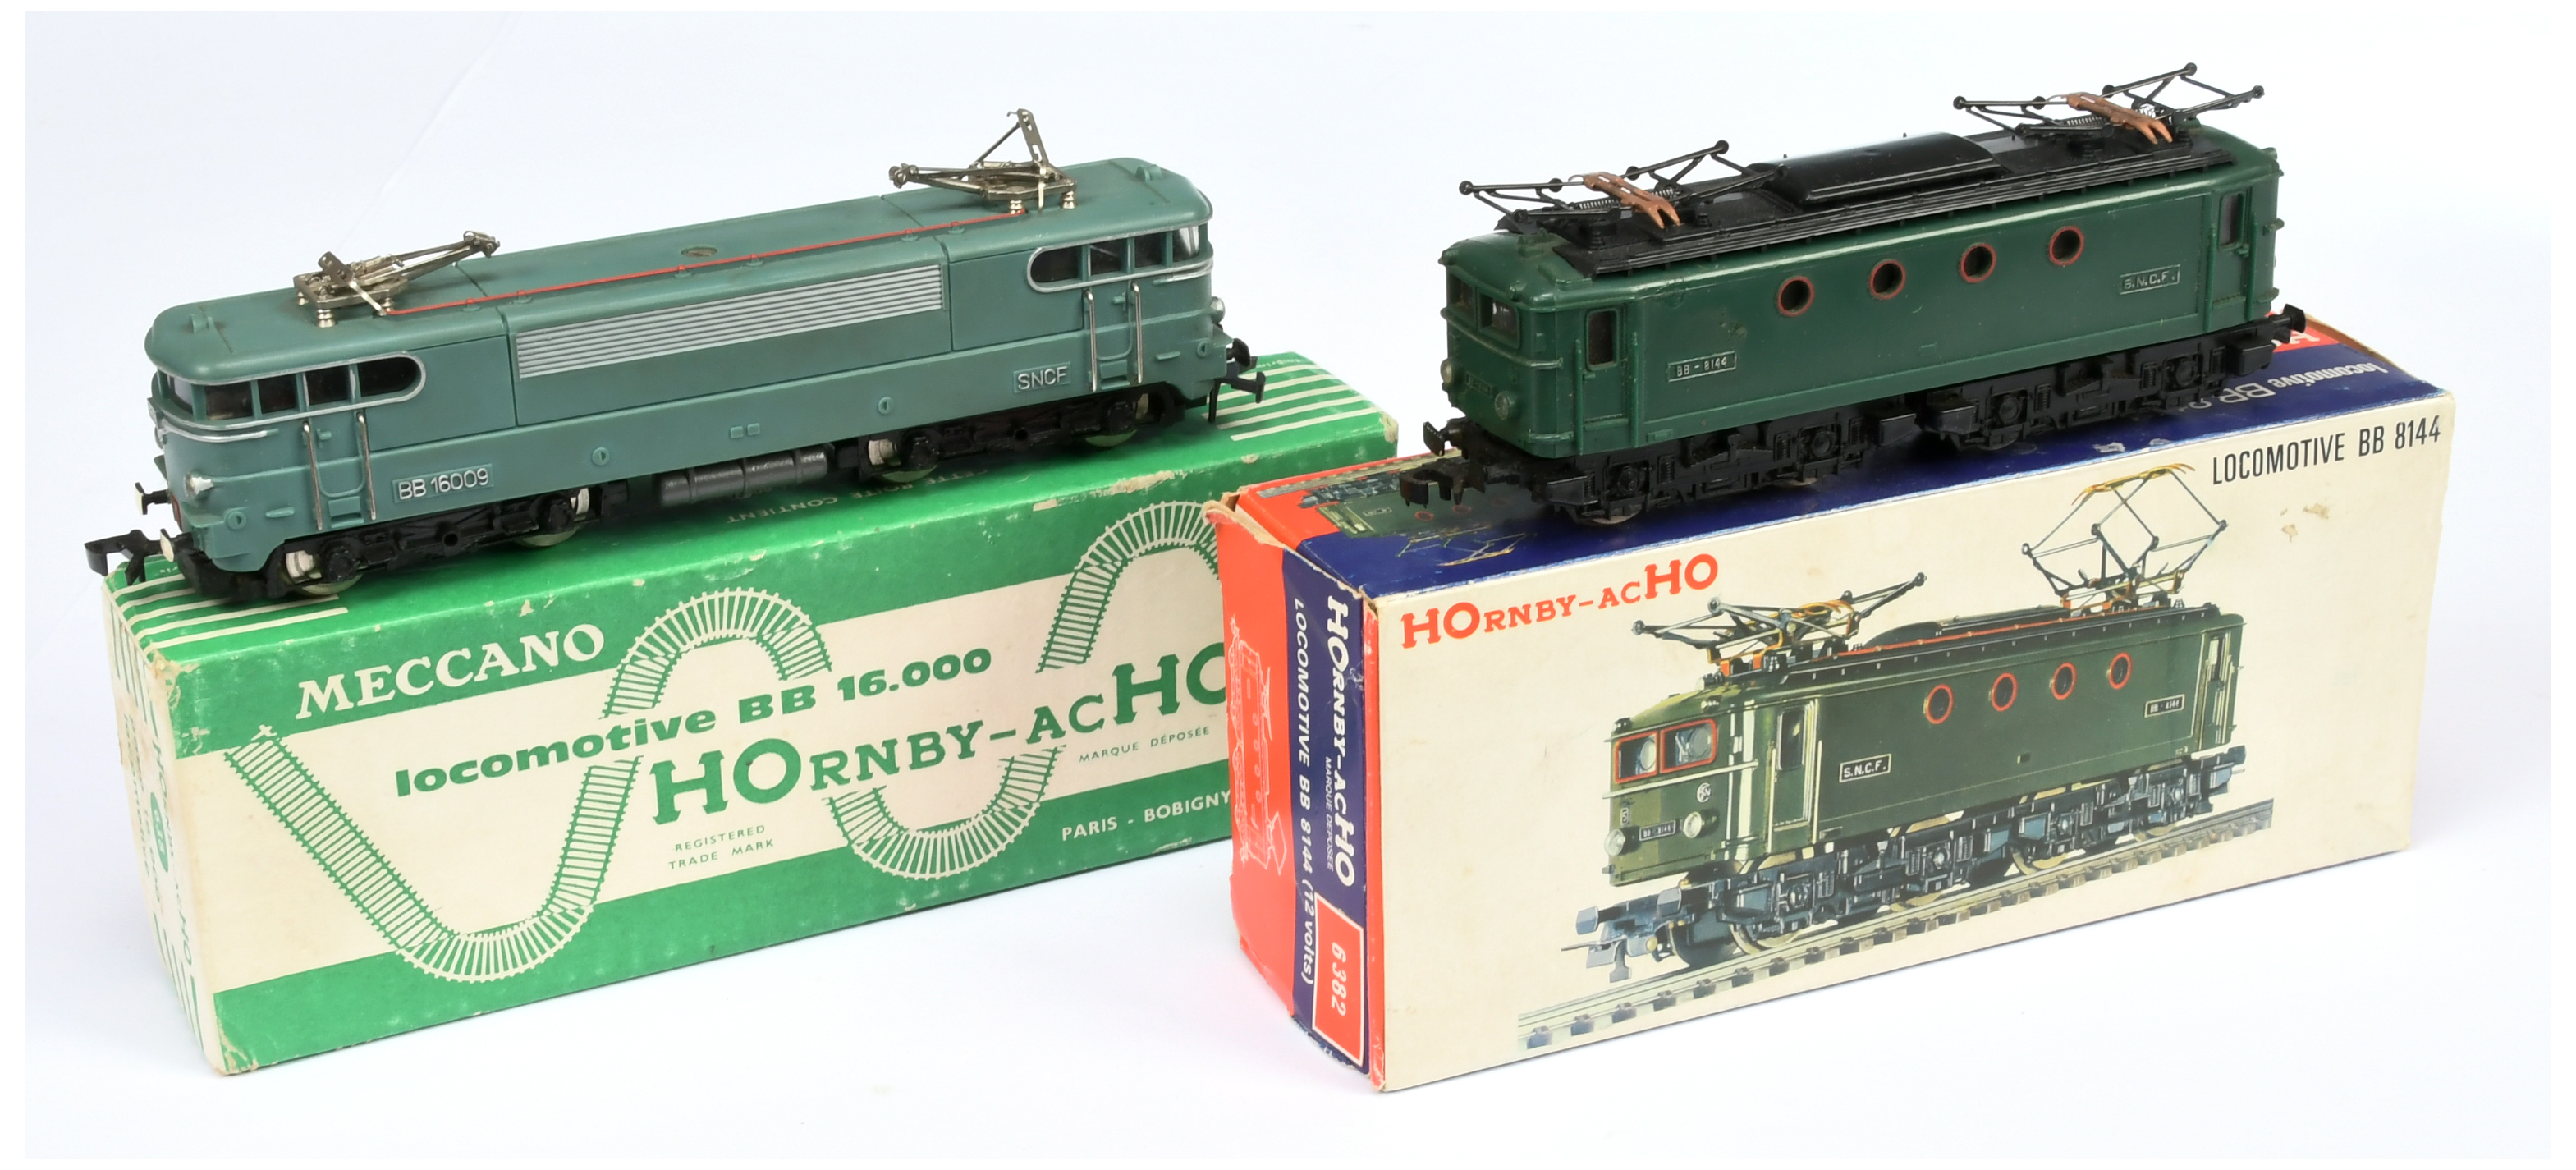 Hornby Acho Ho Pair of boxed SNCF loco's 638 & 6382